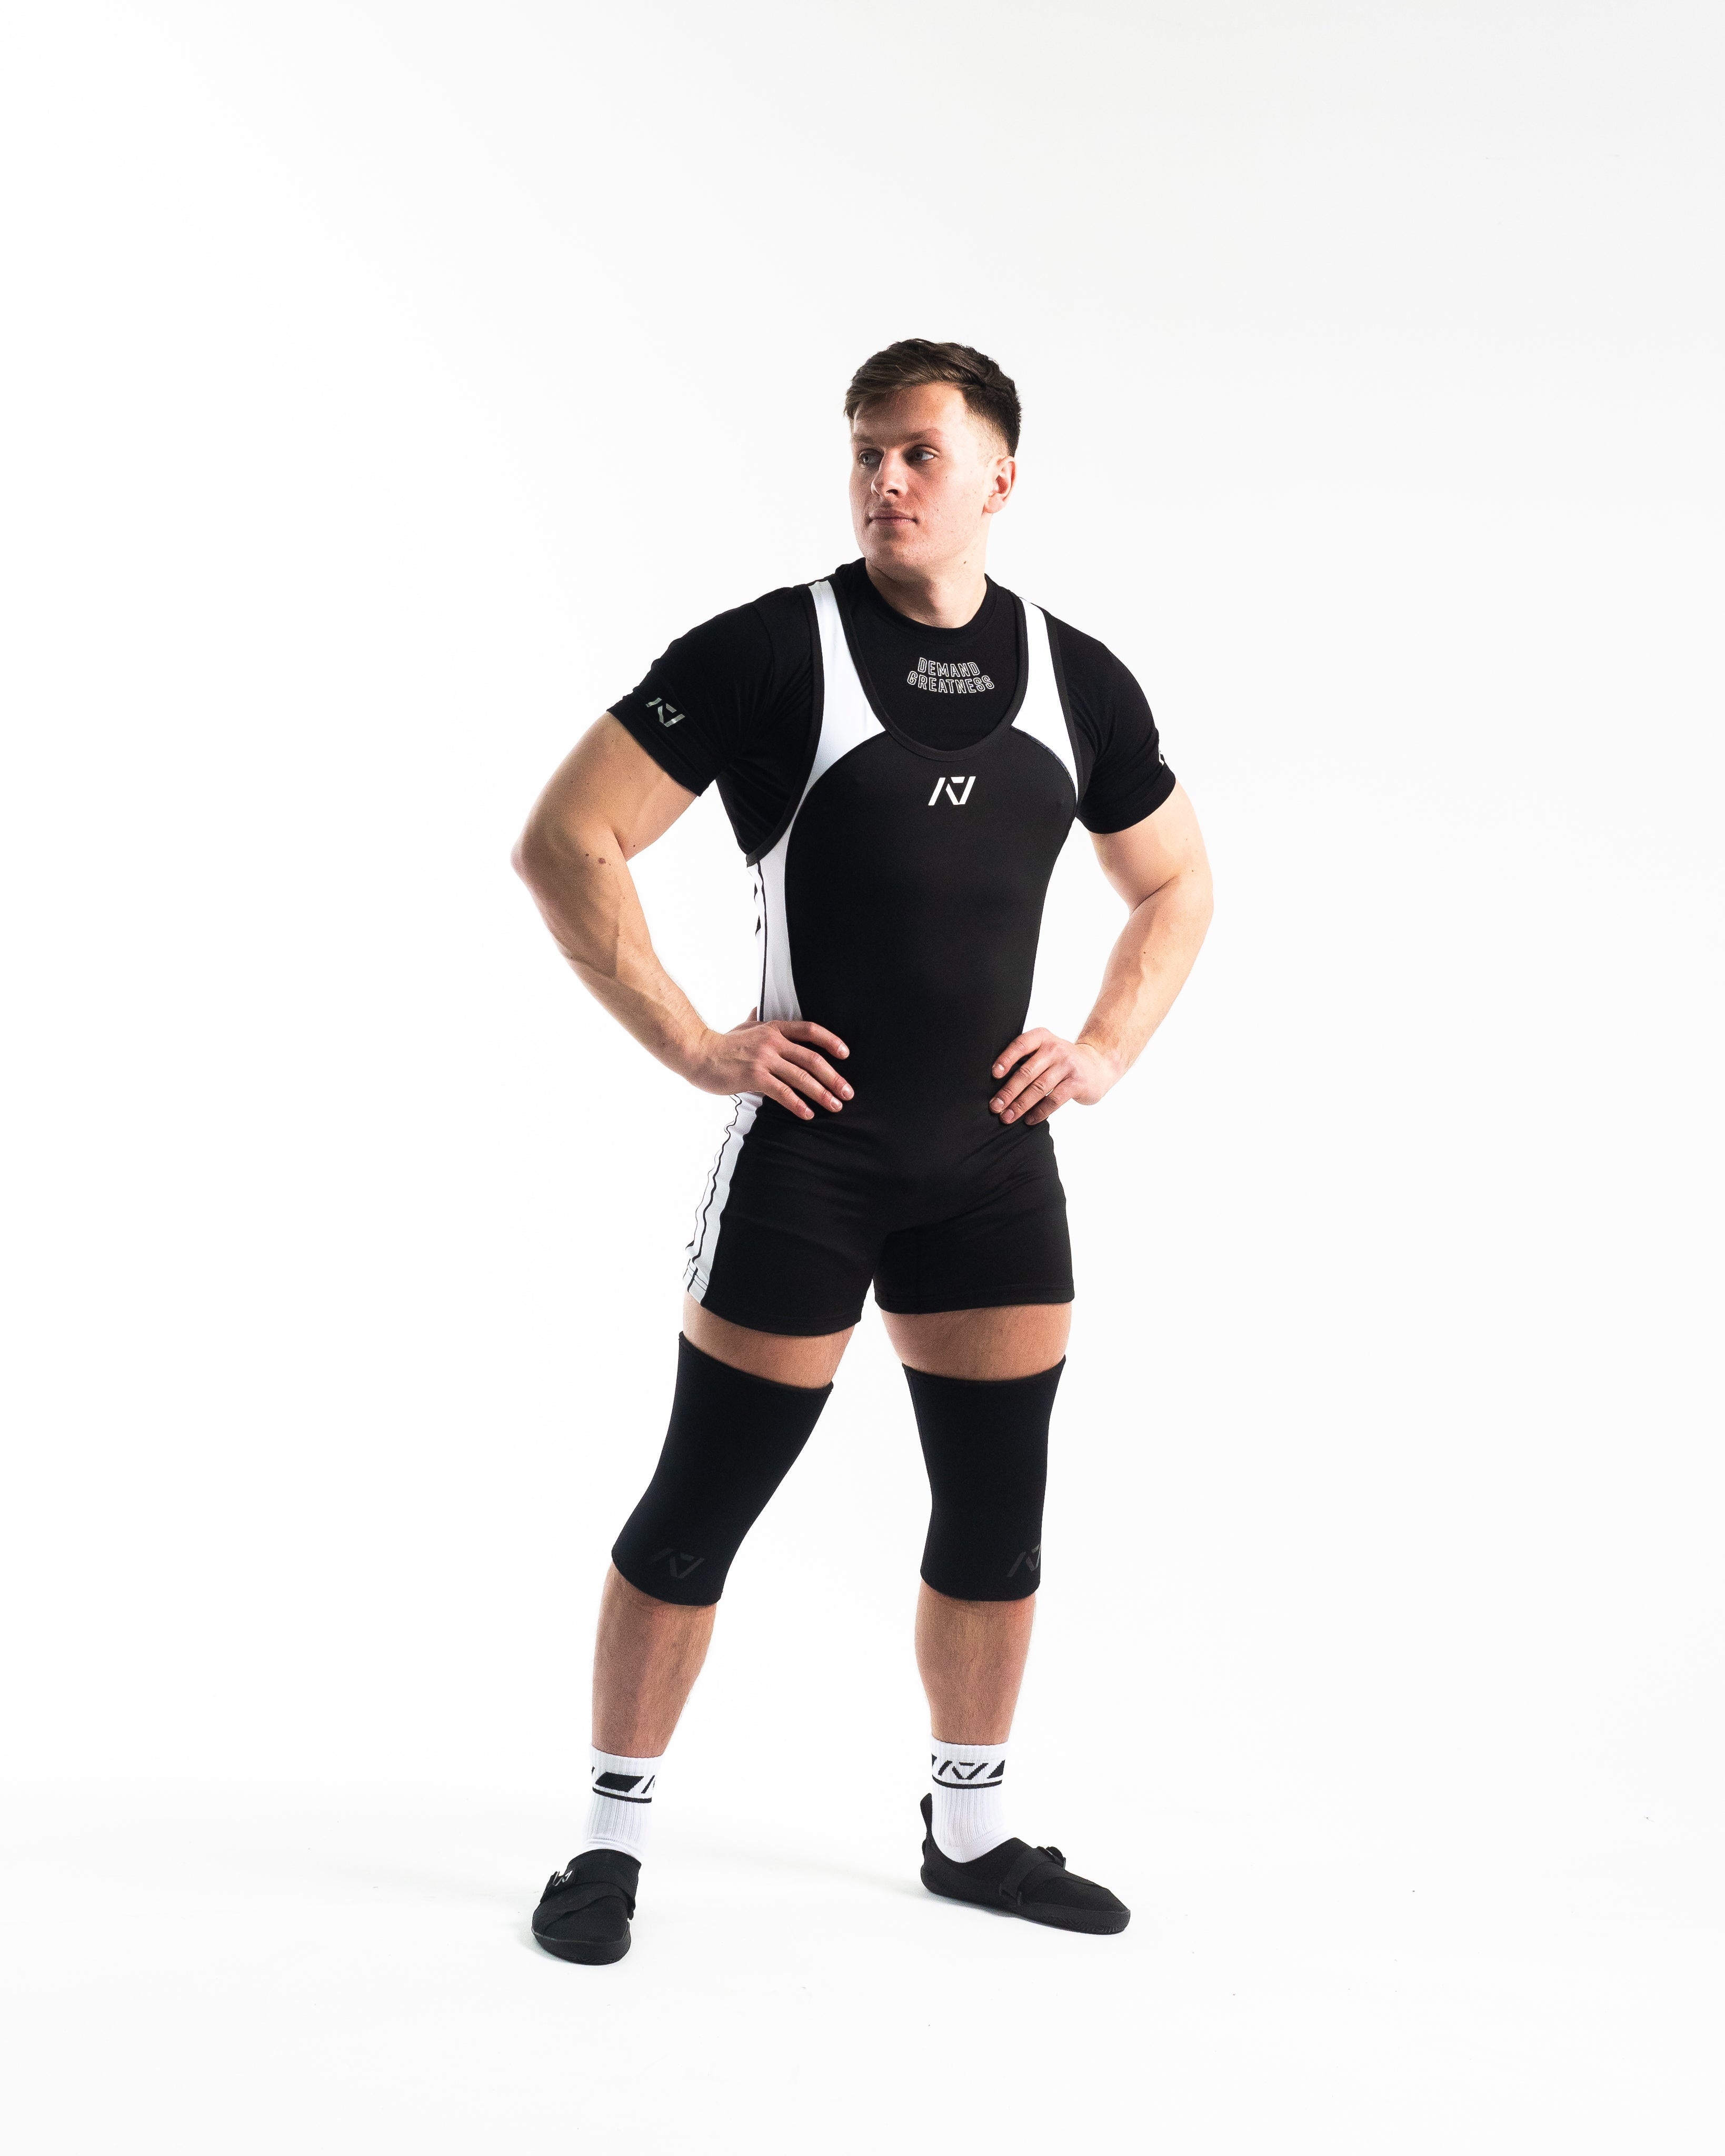 A7 IPF Approved Domino Luno singlet features extra lat mobility, side panel stitching to guide the squat depth level and curved panel design for a slimming look. The Women's cut singlet features a tapered waist and additional quad room. The IPF Approved Kit includes Powerlifting Singlet, A7 Meet Shirt, A7 Zebra Wrist Wraps, A7 Deadlift Socks, Hourglass Knee Sleeves (Stiff Knee Sleeves and Rigor Mortis Knee Sleeves). Genouillères powerlifting shipping to France, Spain, Ireland, Germany, Italy, Sweden and EU.